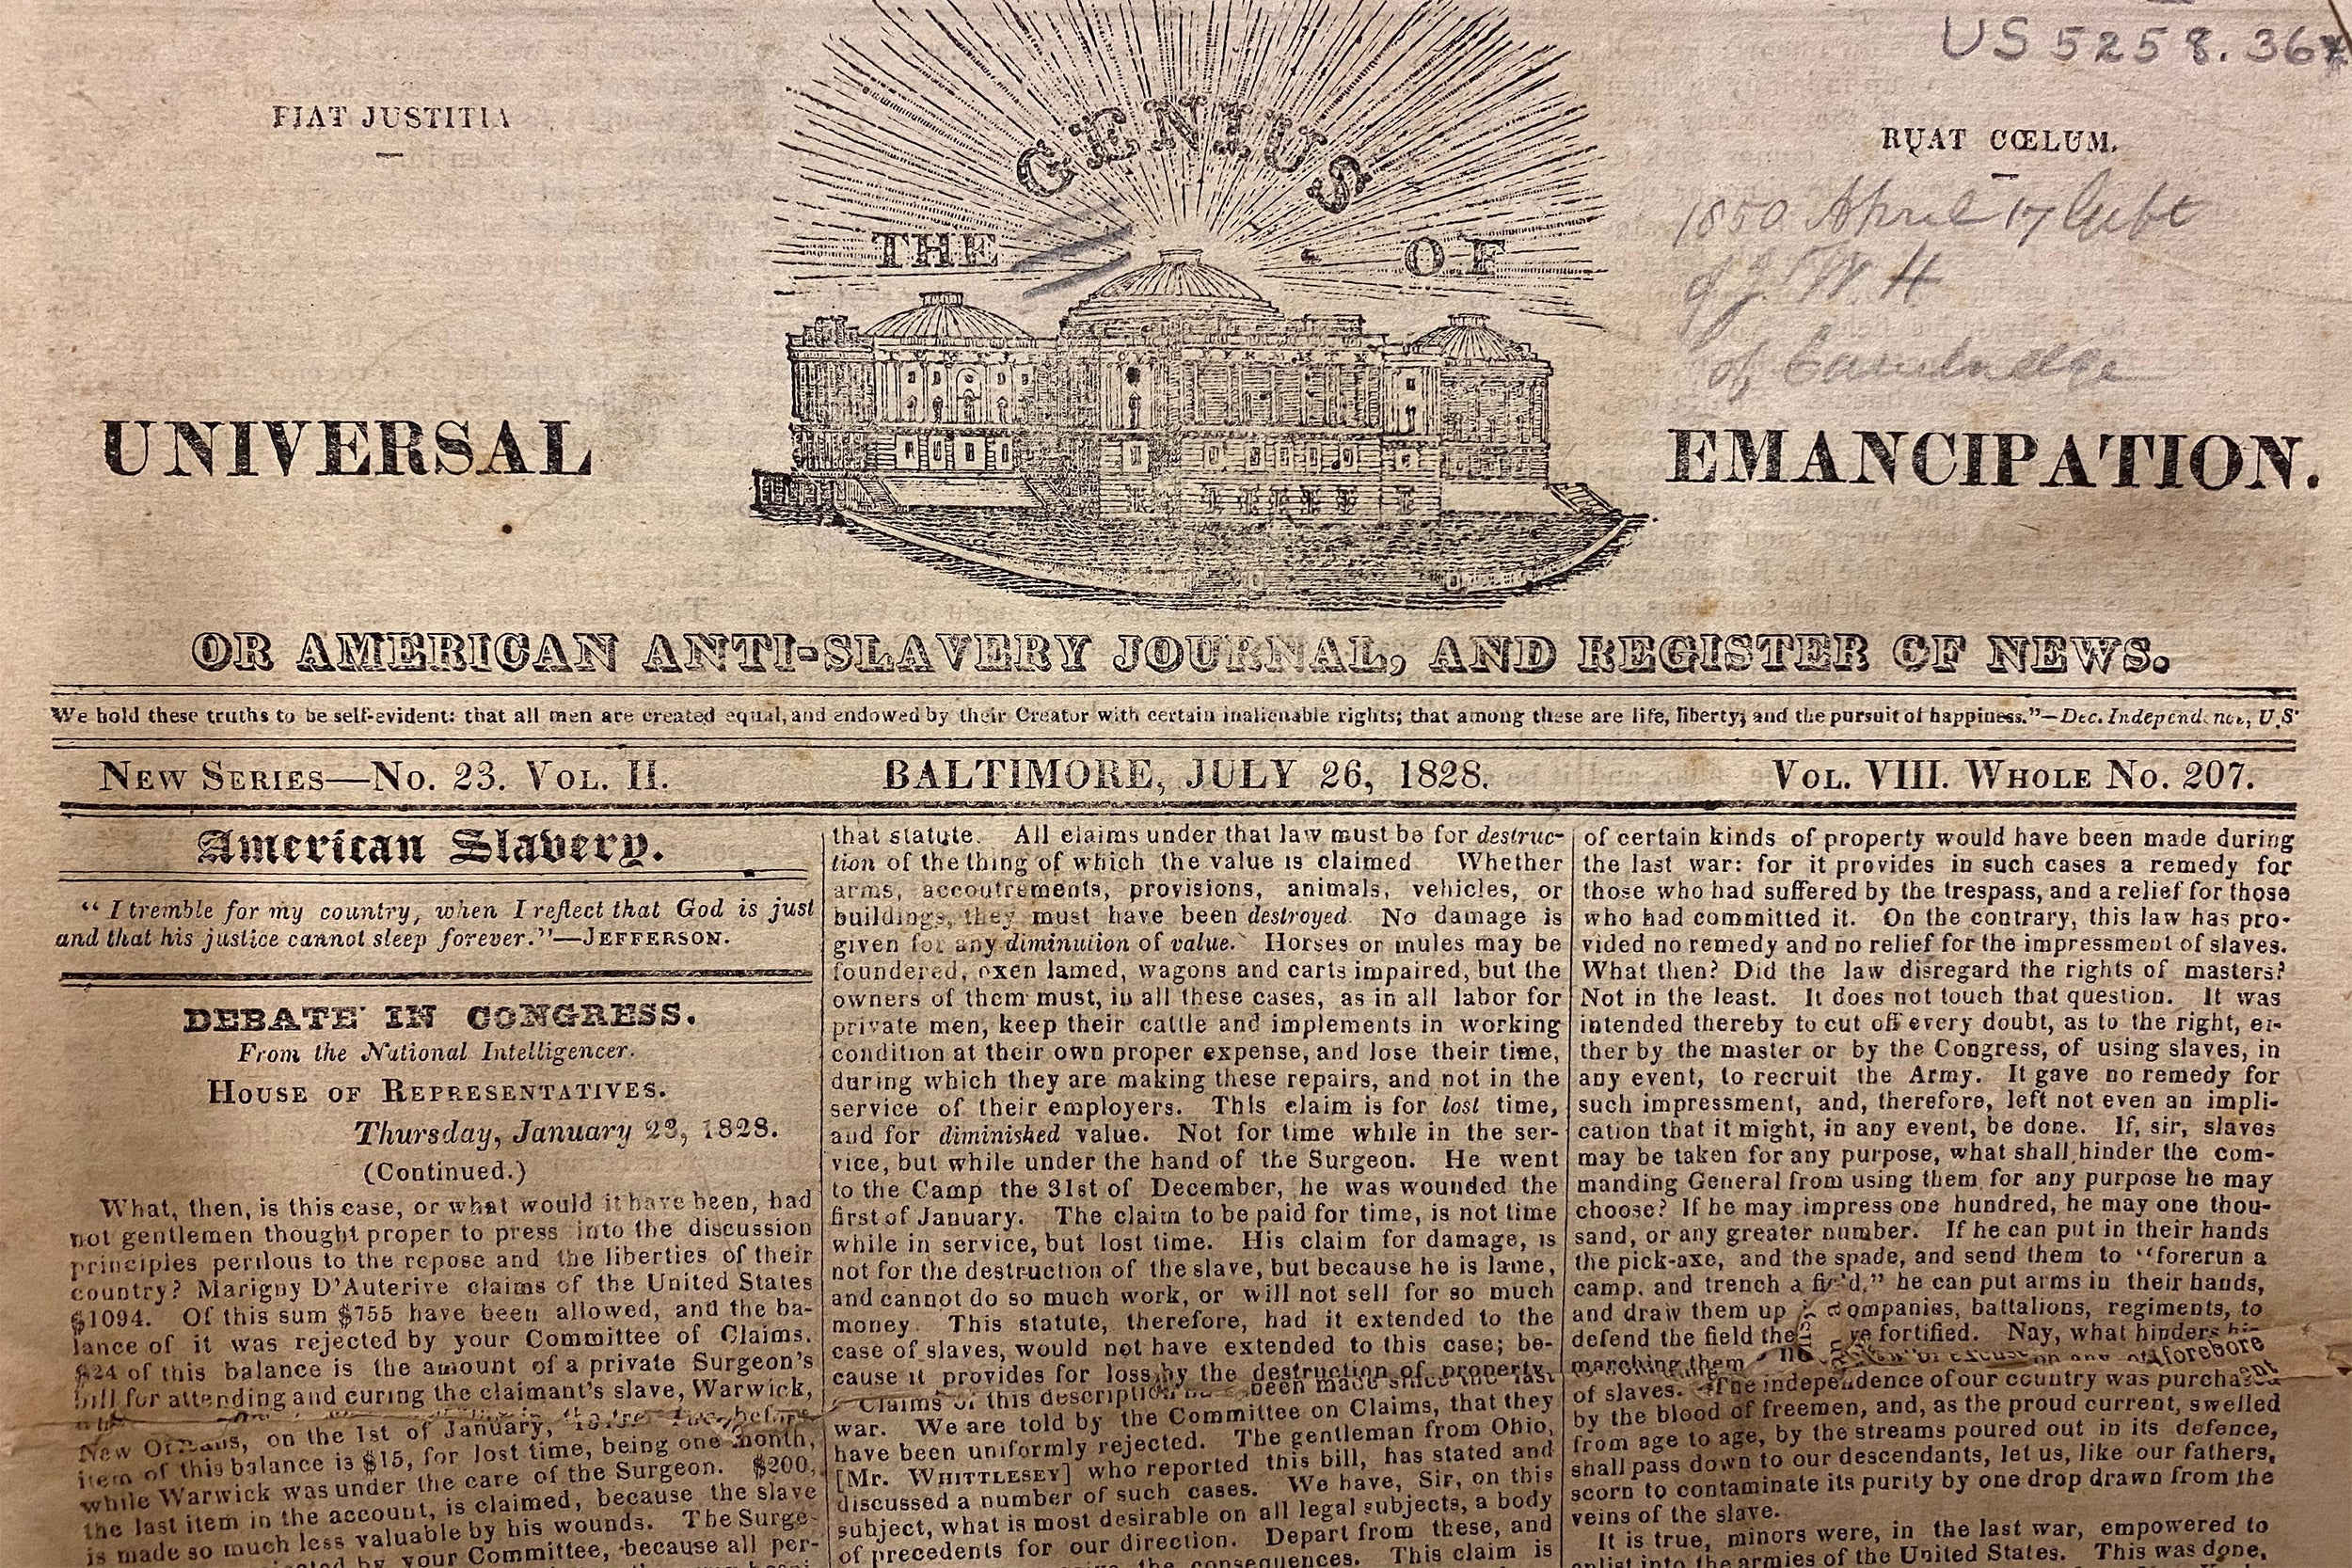 Photos of anti-slavery newspapers, taken by Dorothy Berry as she preps materials for digitization.